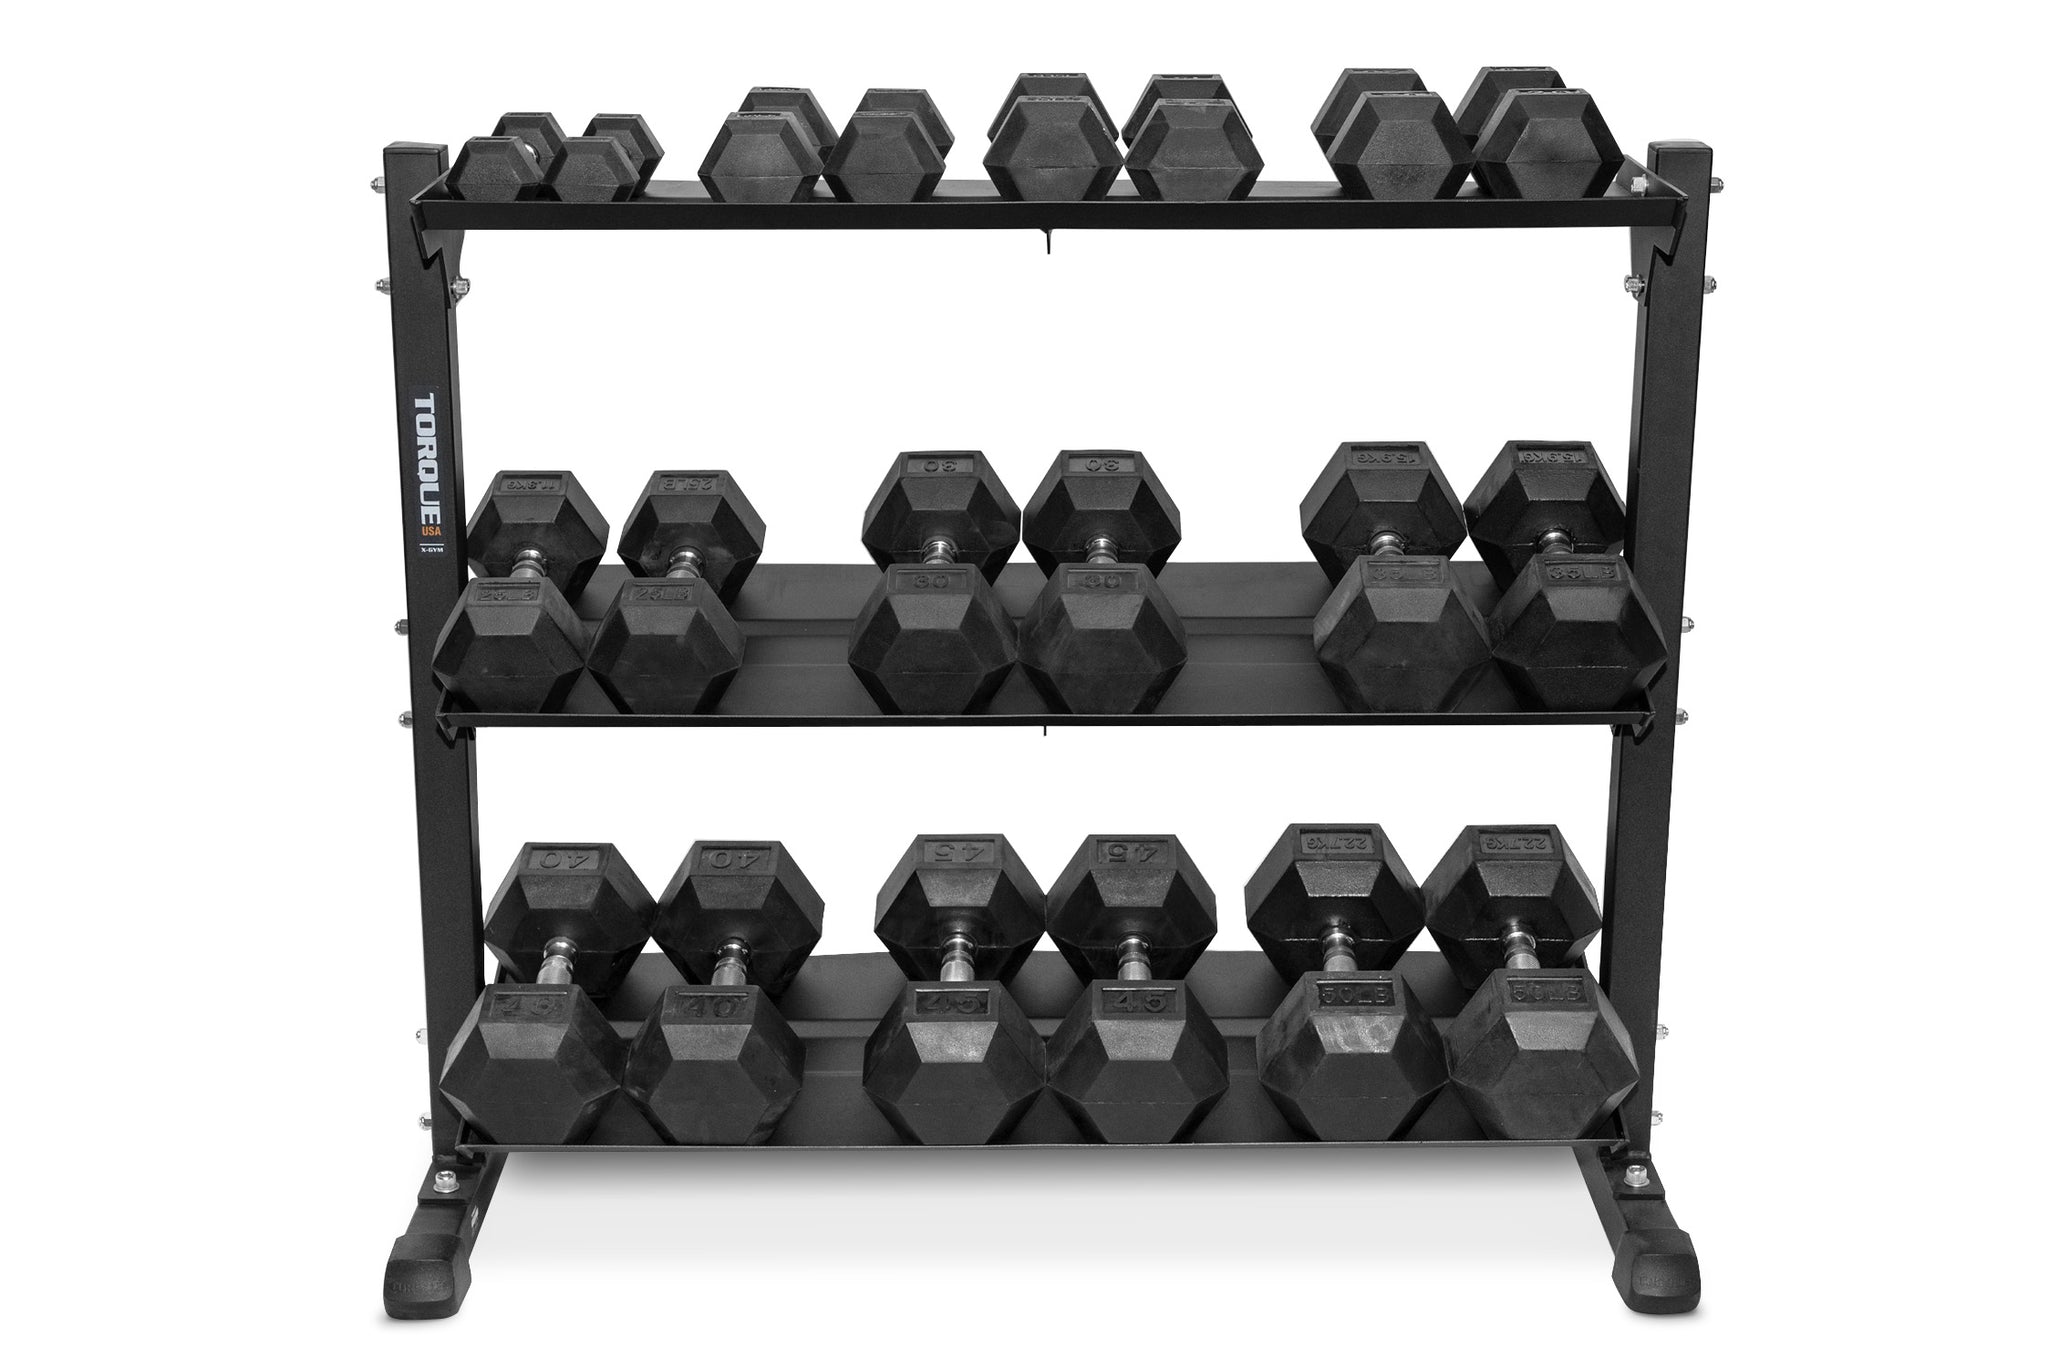 5-50 Rubber Hex Dumbbell Set with 4' Storage Rack